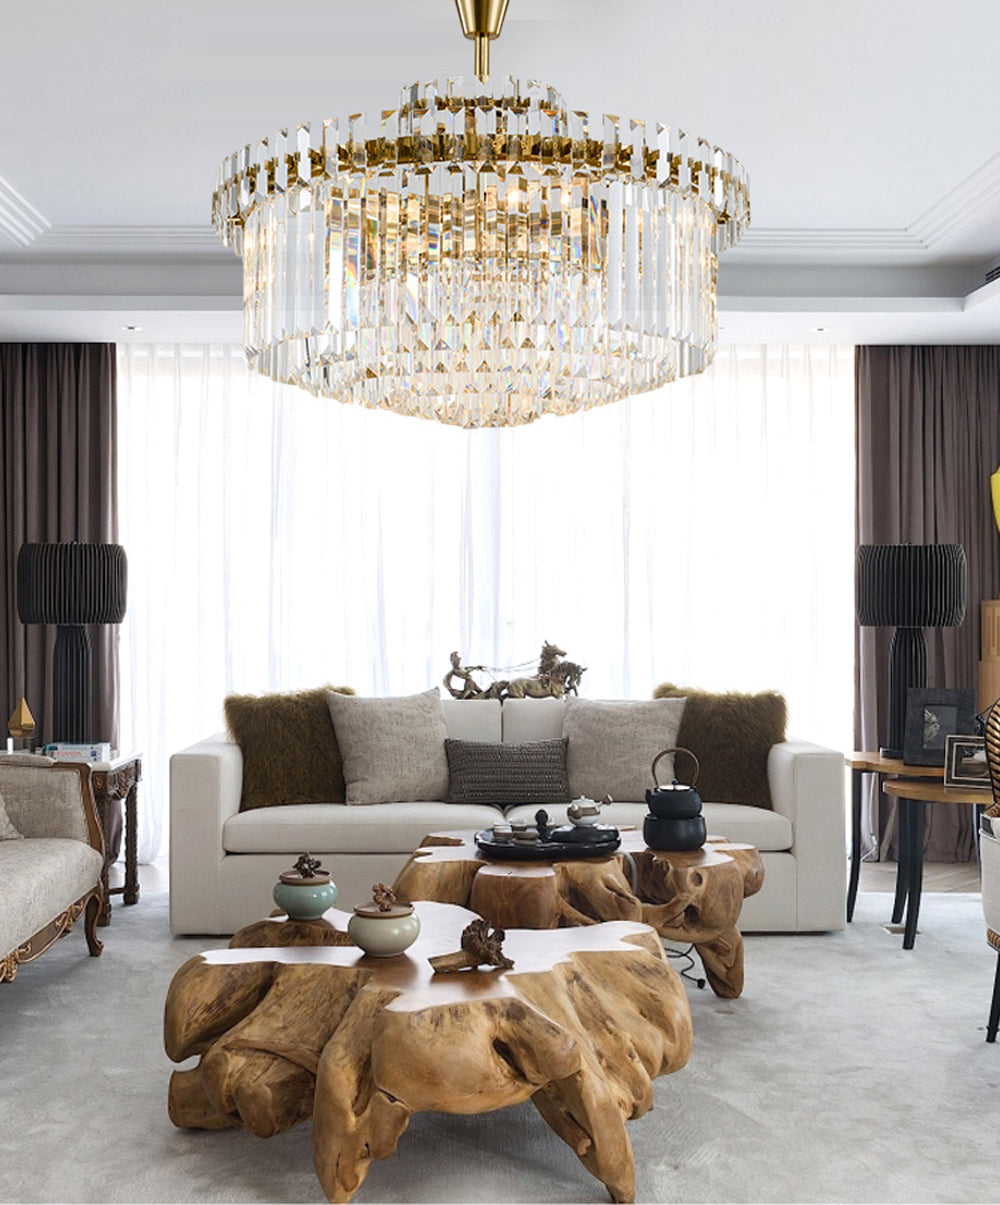 Astera Crystal Chandelier - Creating Coziness